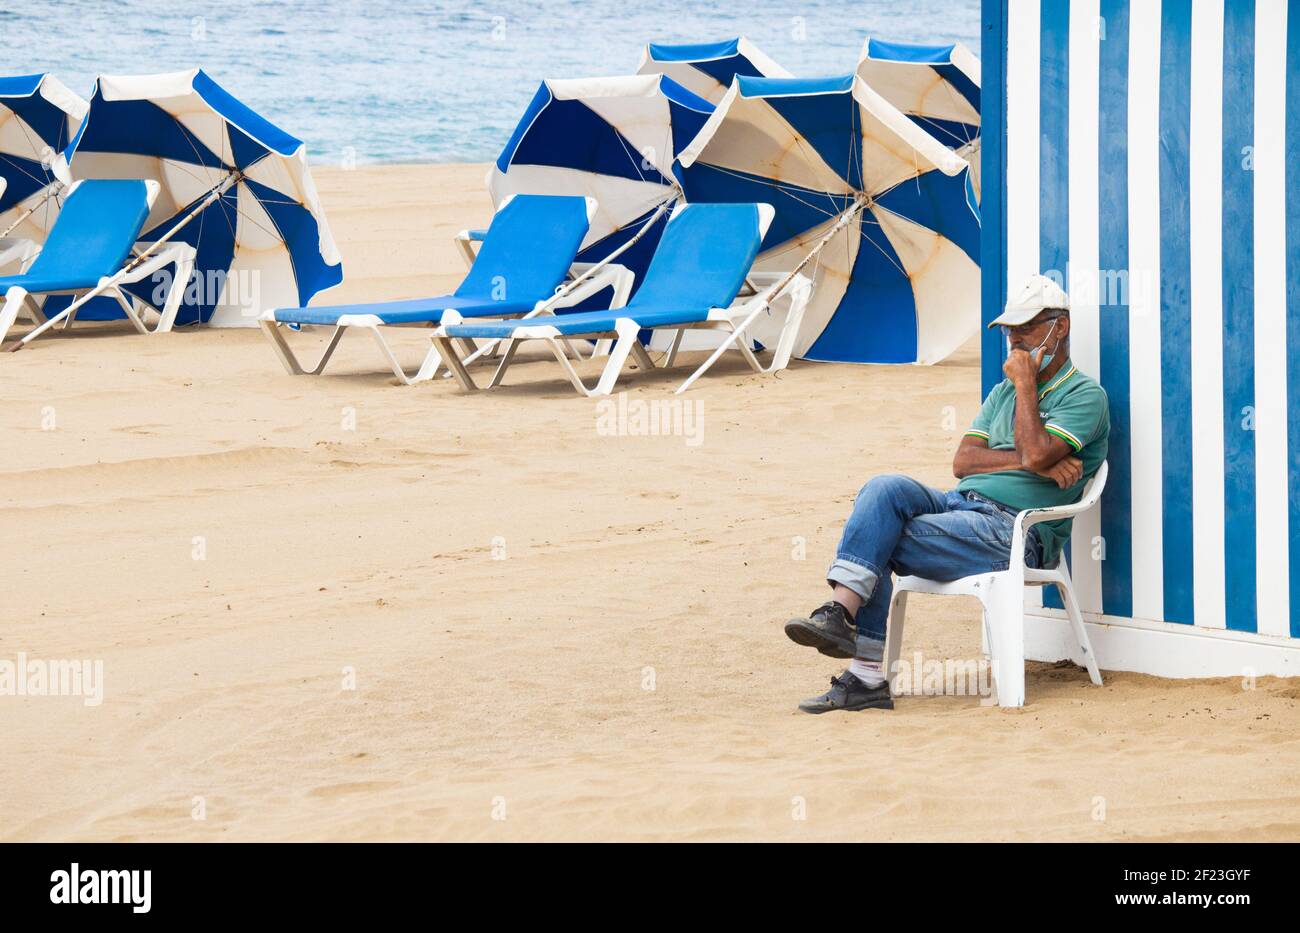 Las Palmas, Gran Canaria, Canary Islands, Spain. 10th March, 2021. A man hiring sunloungers takes a siesta on a quiet city beach in Las Palmas on Gran Canaria; a popular destination for many British holidaymakers. A glimmer of hope for the beleaguered tourism dependent Canary Islands economy as Covid vaccine passports are being considered by Spain in an effort to reboot tourism in the country. Credit: Alan Dawson/Alamy Live News. Stock Photo